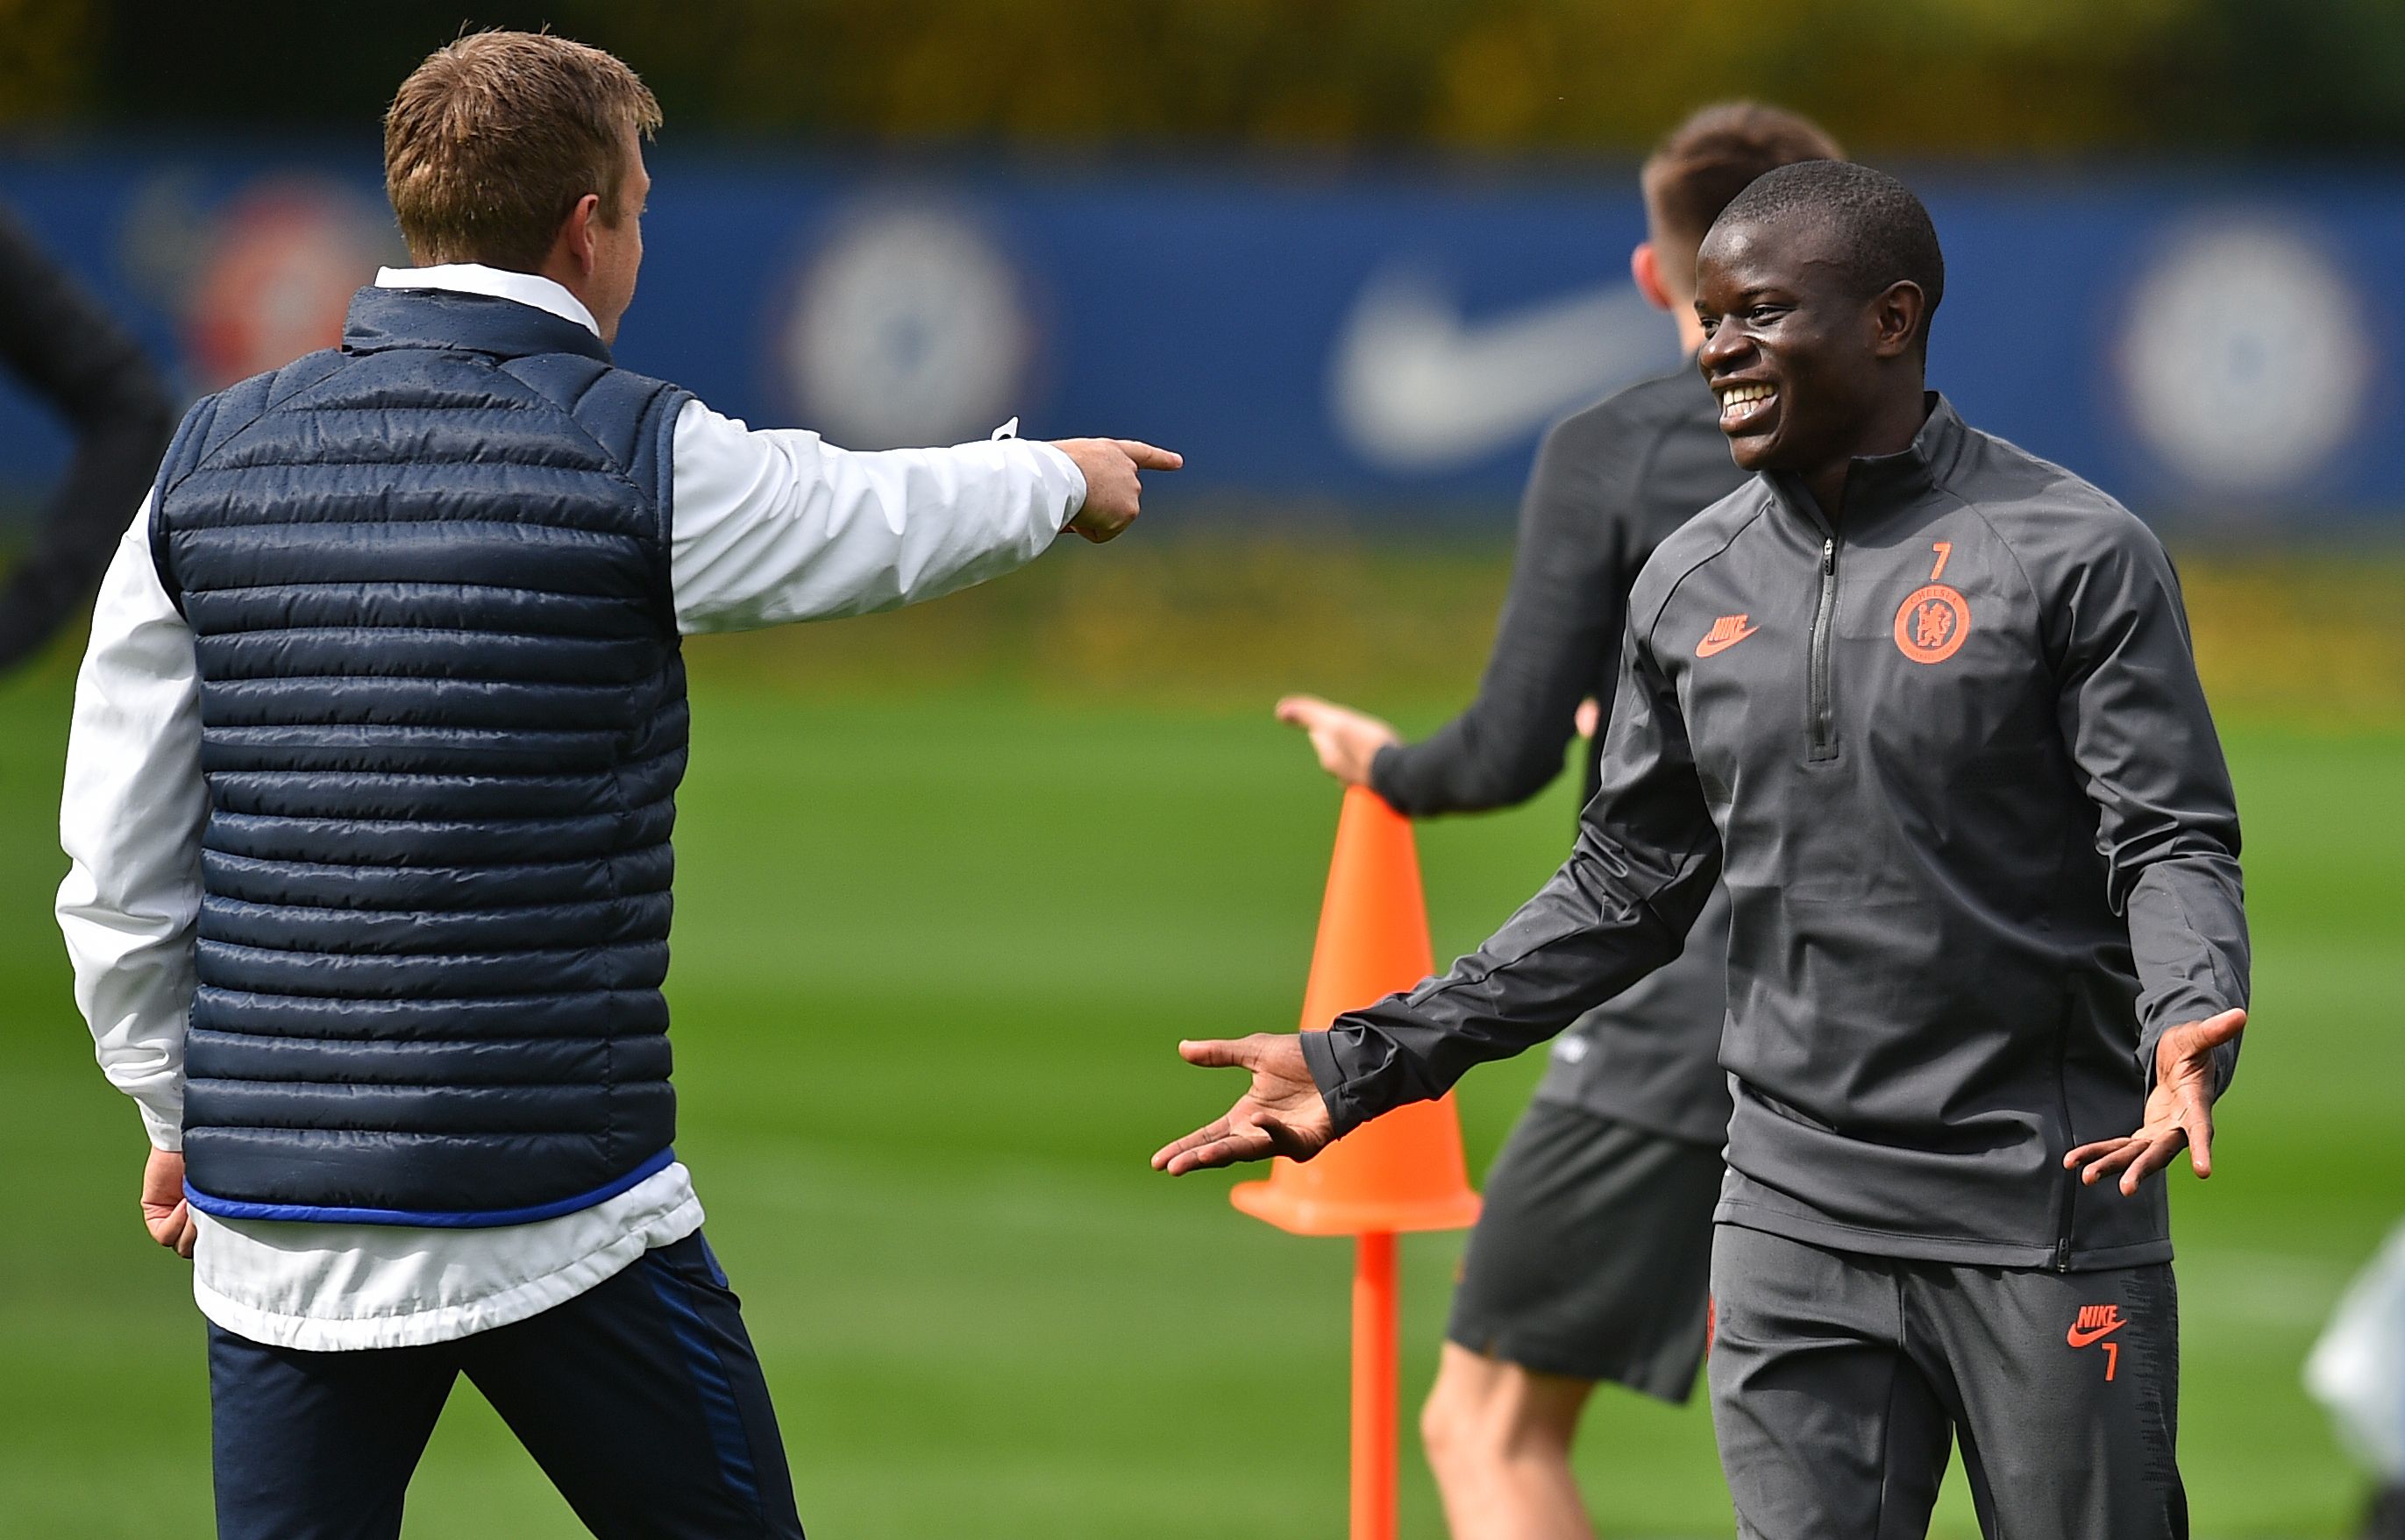 Chelsea's French midfielder N'Golo Kante (R) attends a training session at Chelsea's Cobham training facility in Stoke D'Abernon, southwest of London on May October 1, 2019, on the eve of their UEFA Champions League Group H football match against Lille. (Photo by Glyn KIRK / AFP)        (Photo credit should read GLYN KIRK/AFP/Getty Images)